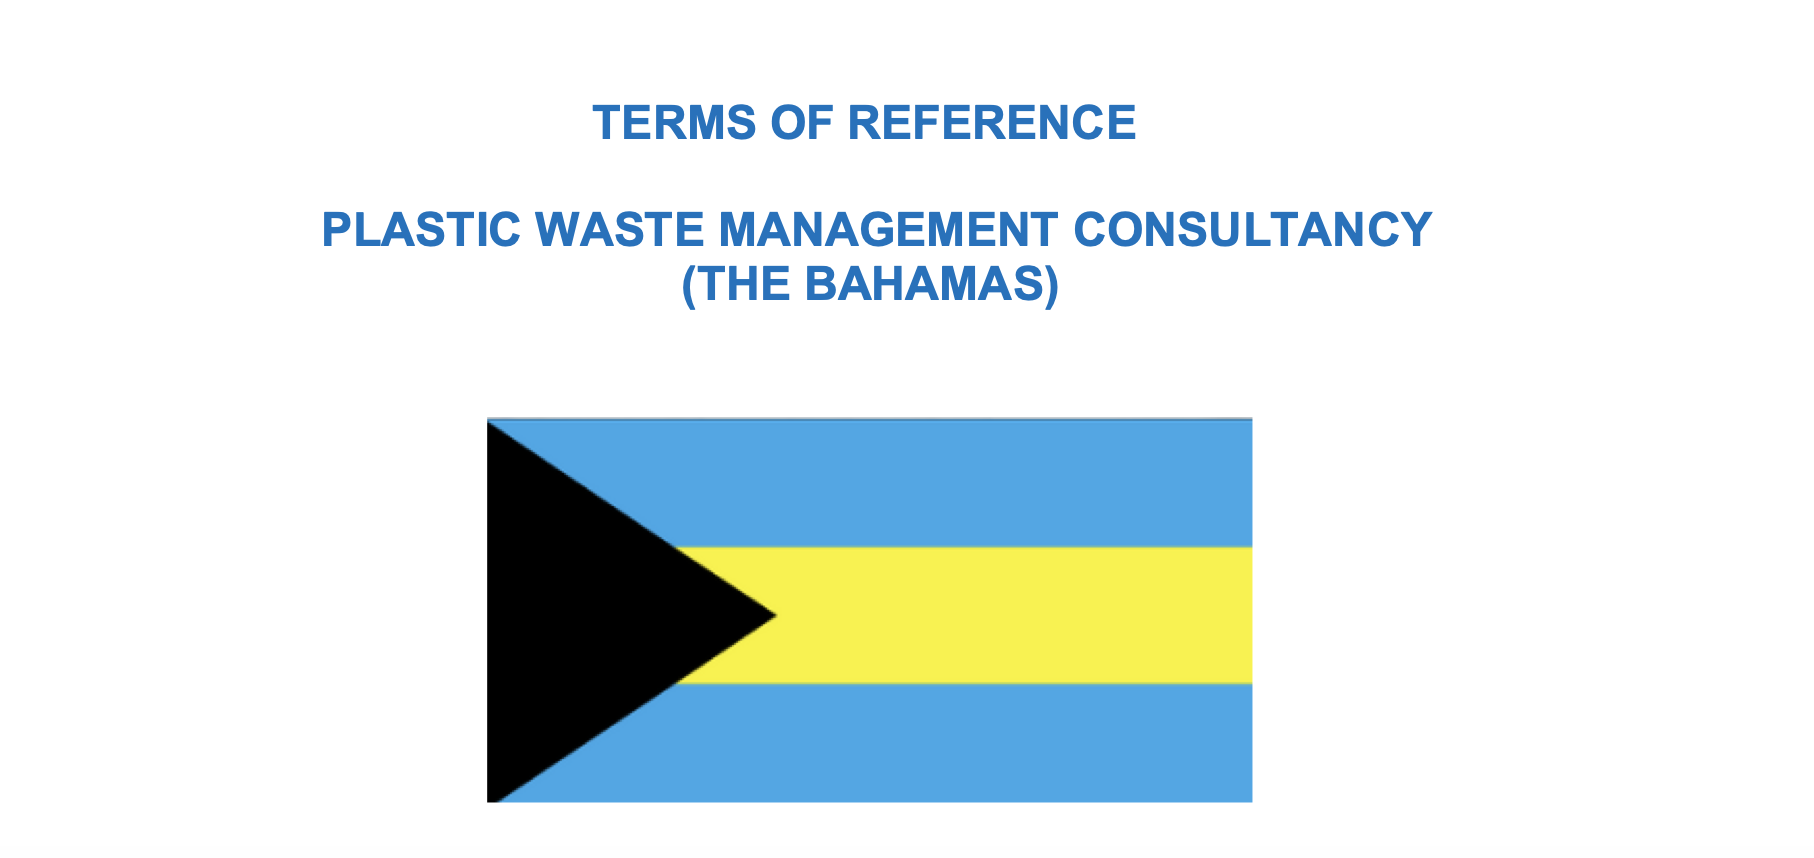 Plastic Waste Management Consultancy in The Bahamas 